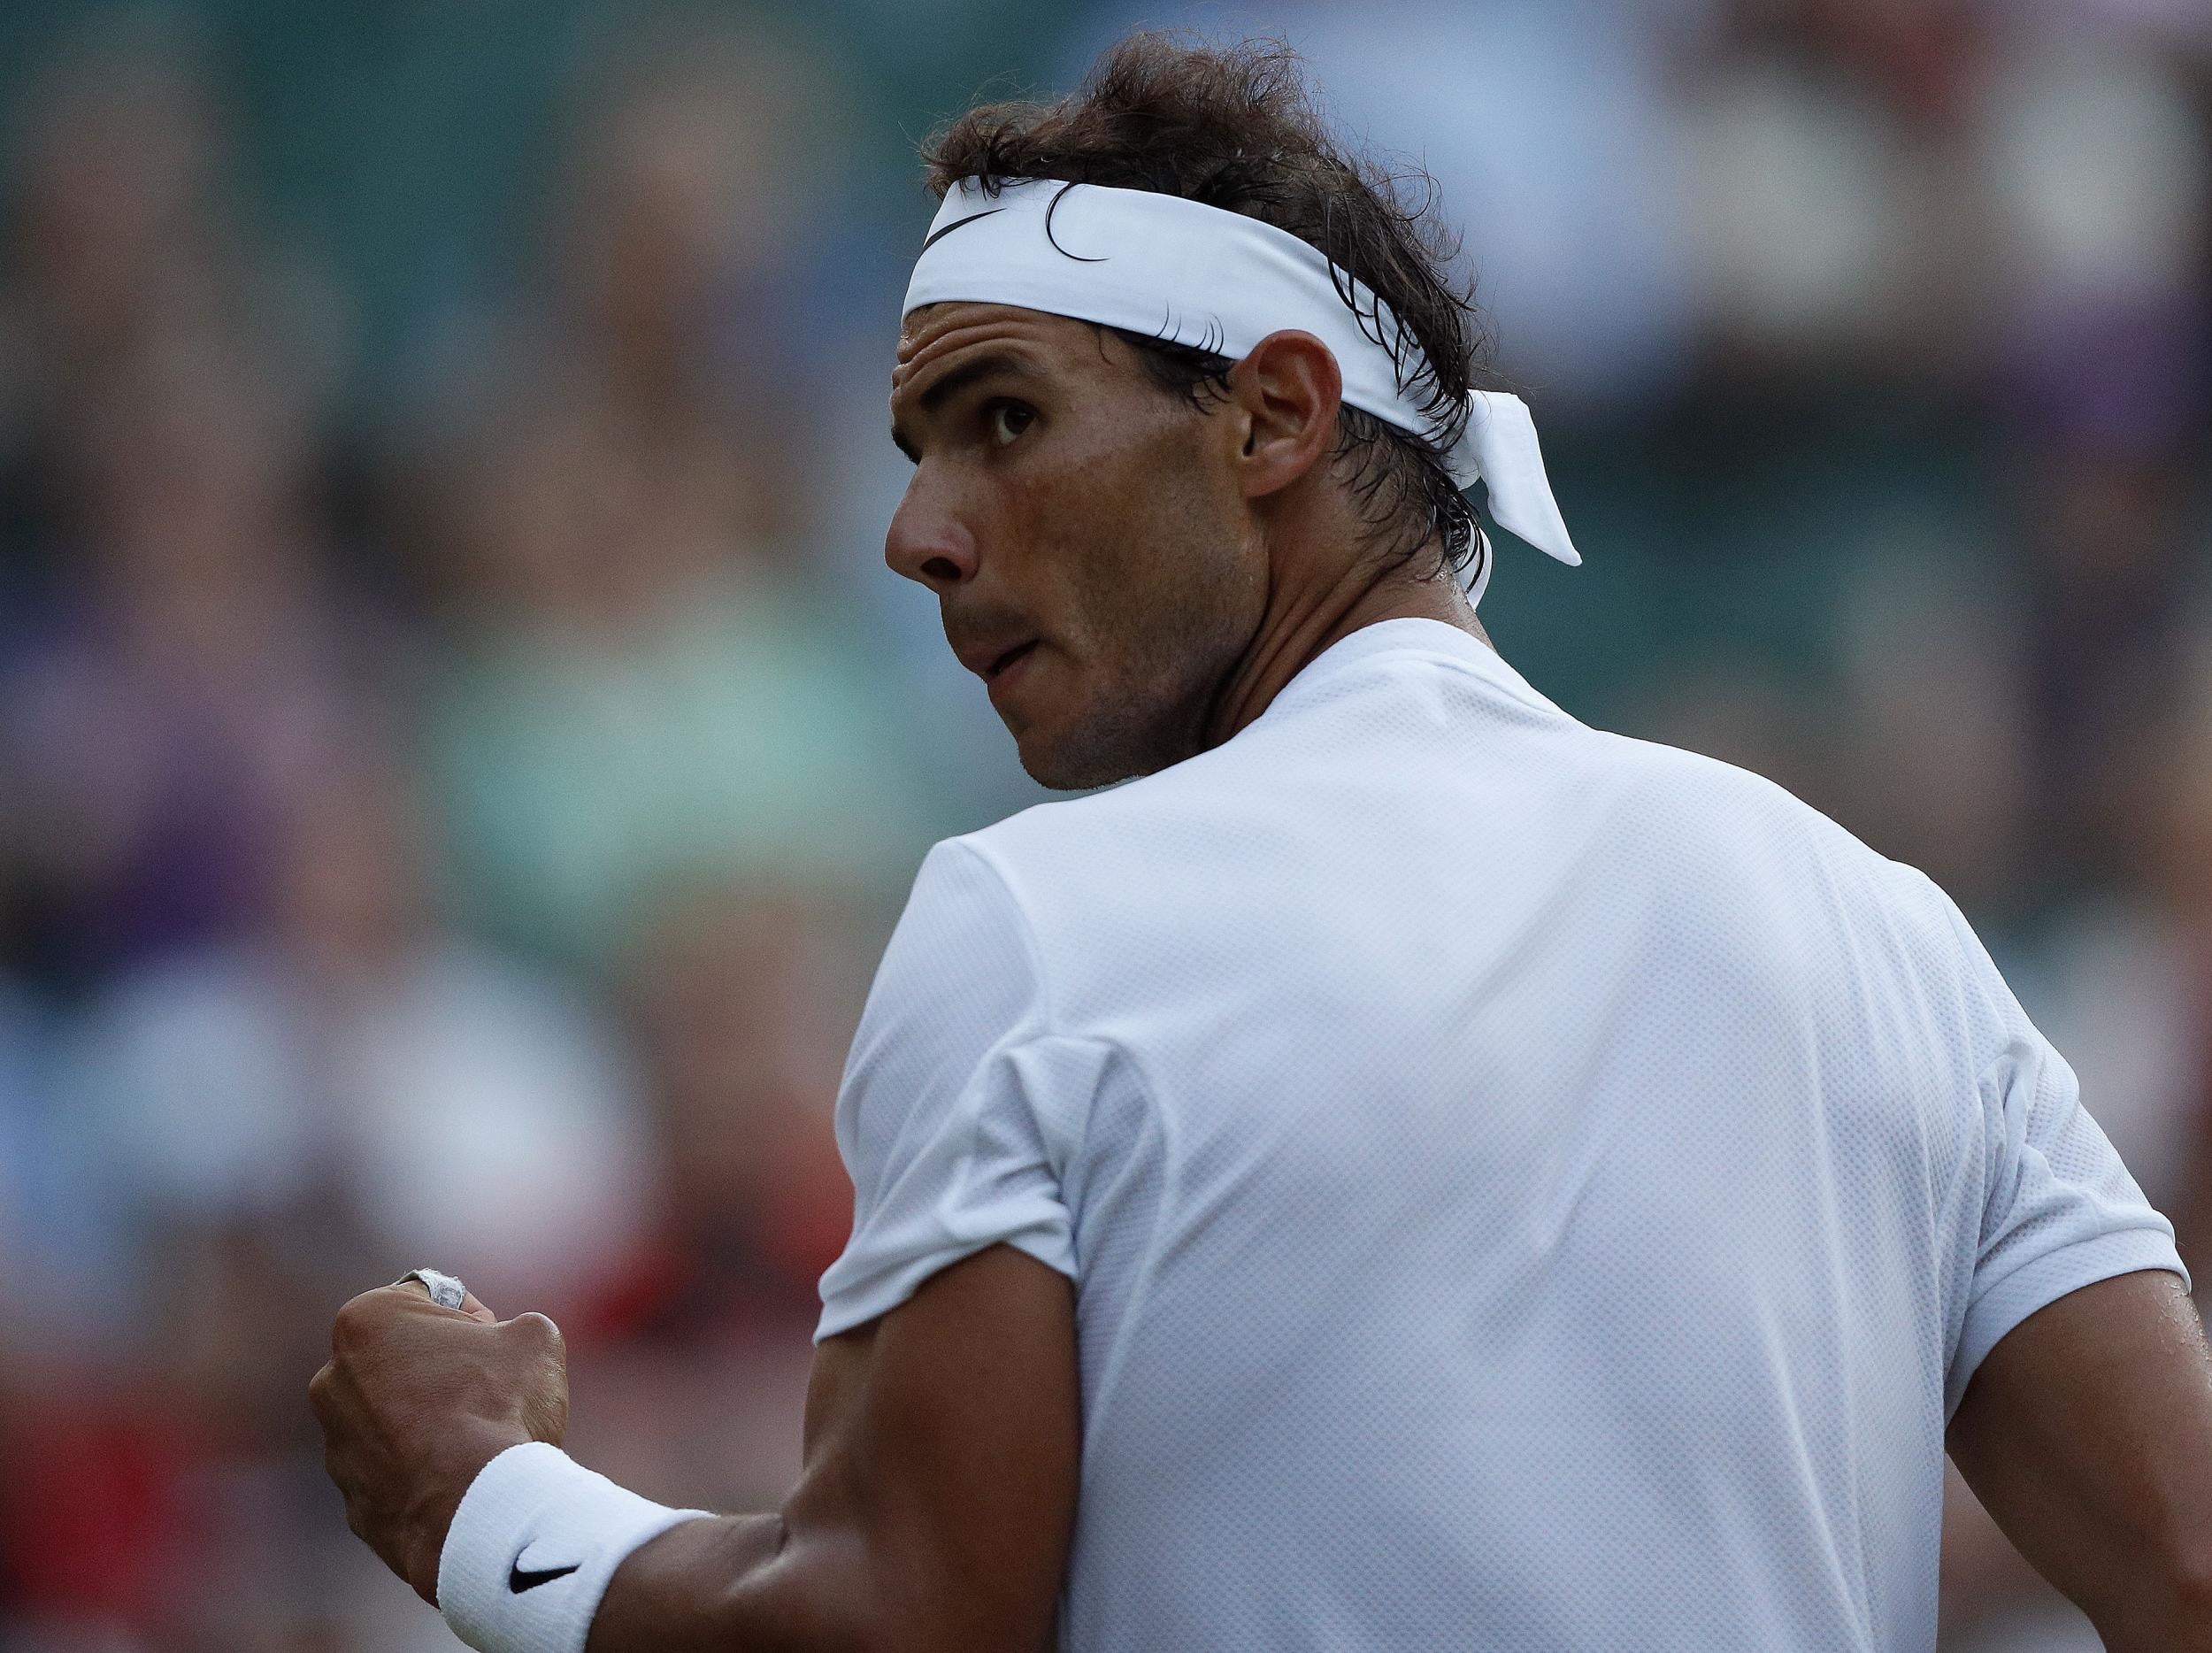 Nadal made it through the first week of Wimbledon with no hiccups